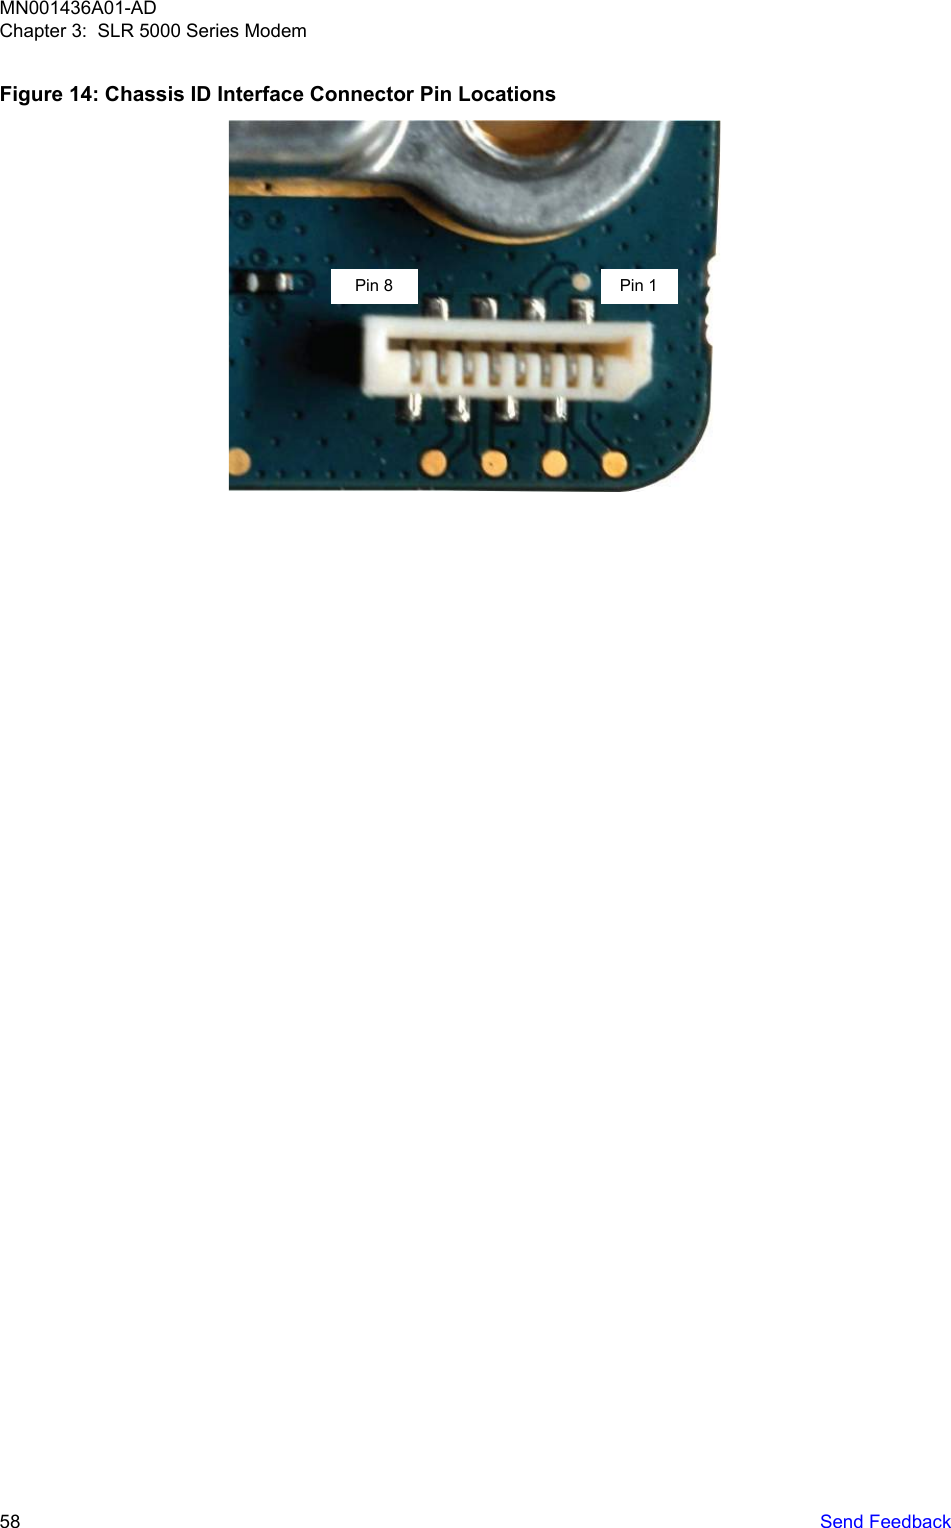 Figure 14: Chassis ID Interface Connector Pin LocationsPin 8 Pin 1MN001436A01-ADChapter 3:  SLR 5000 Series Modem58   Send Feedback